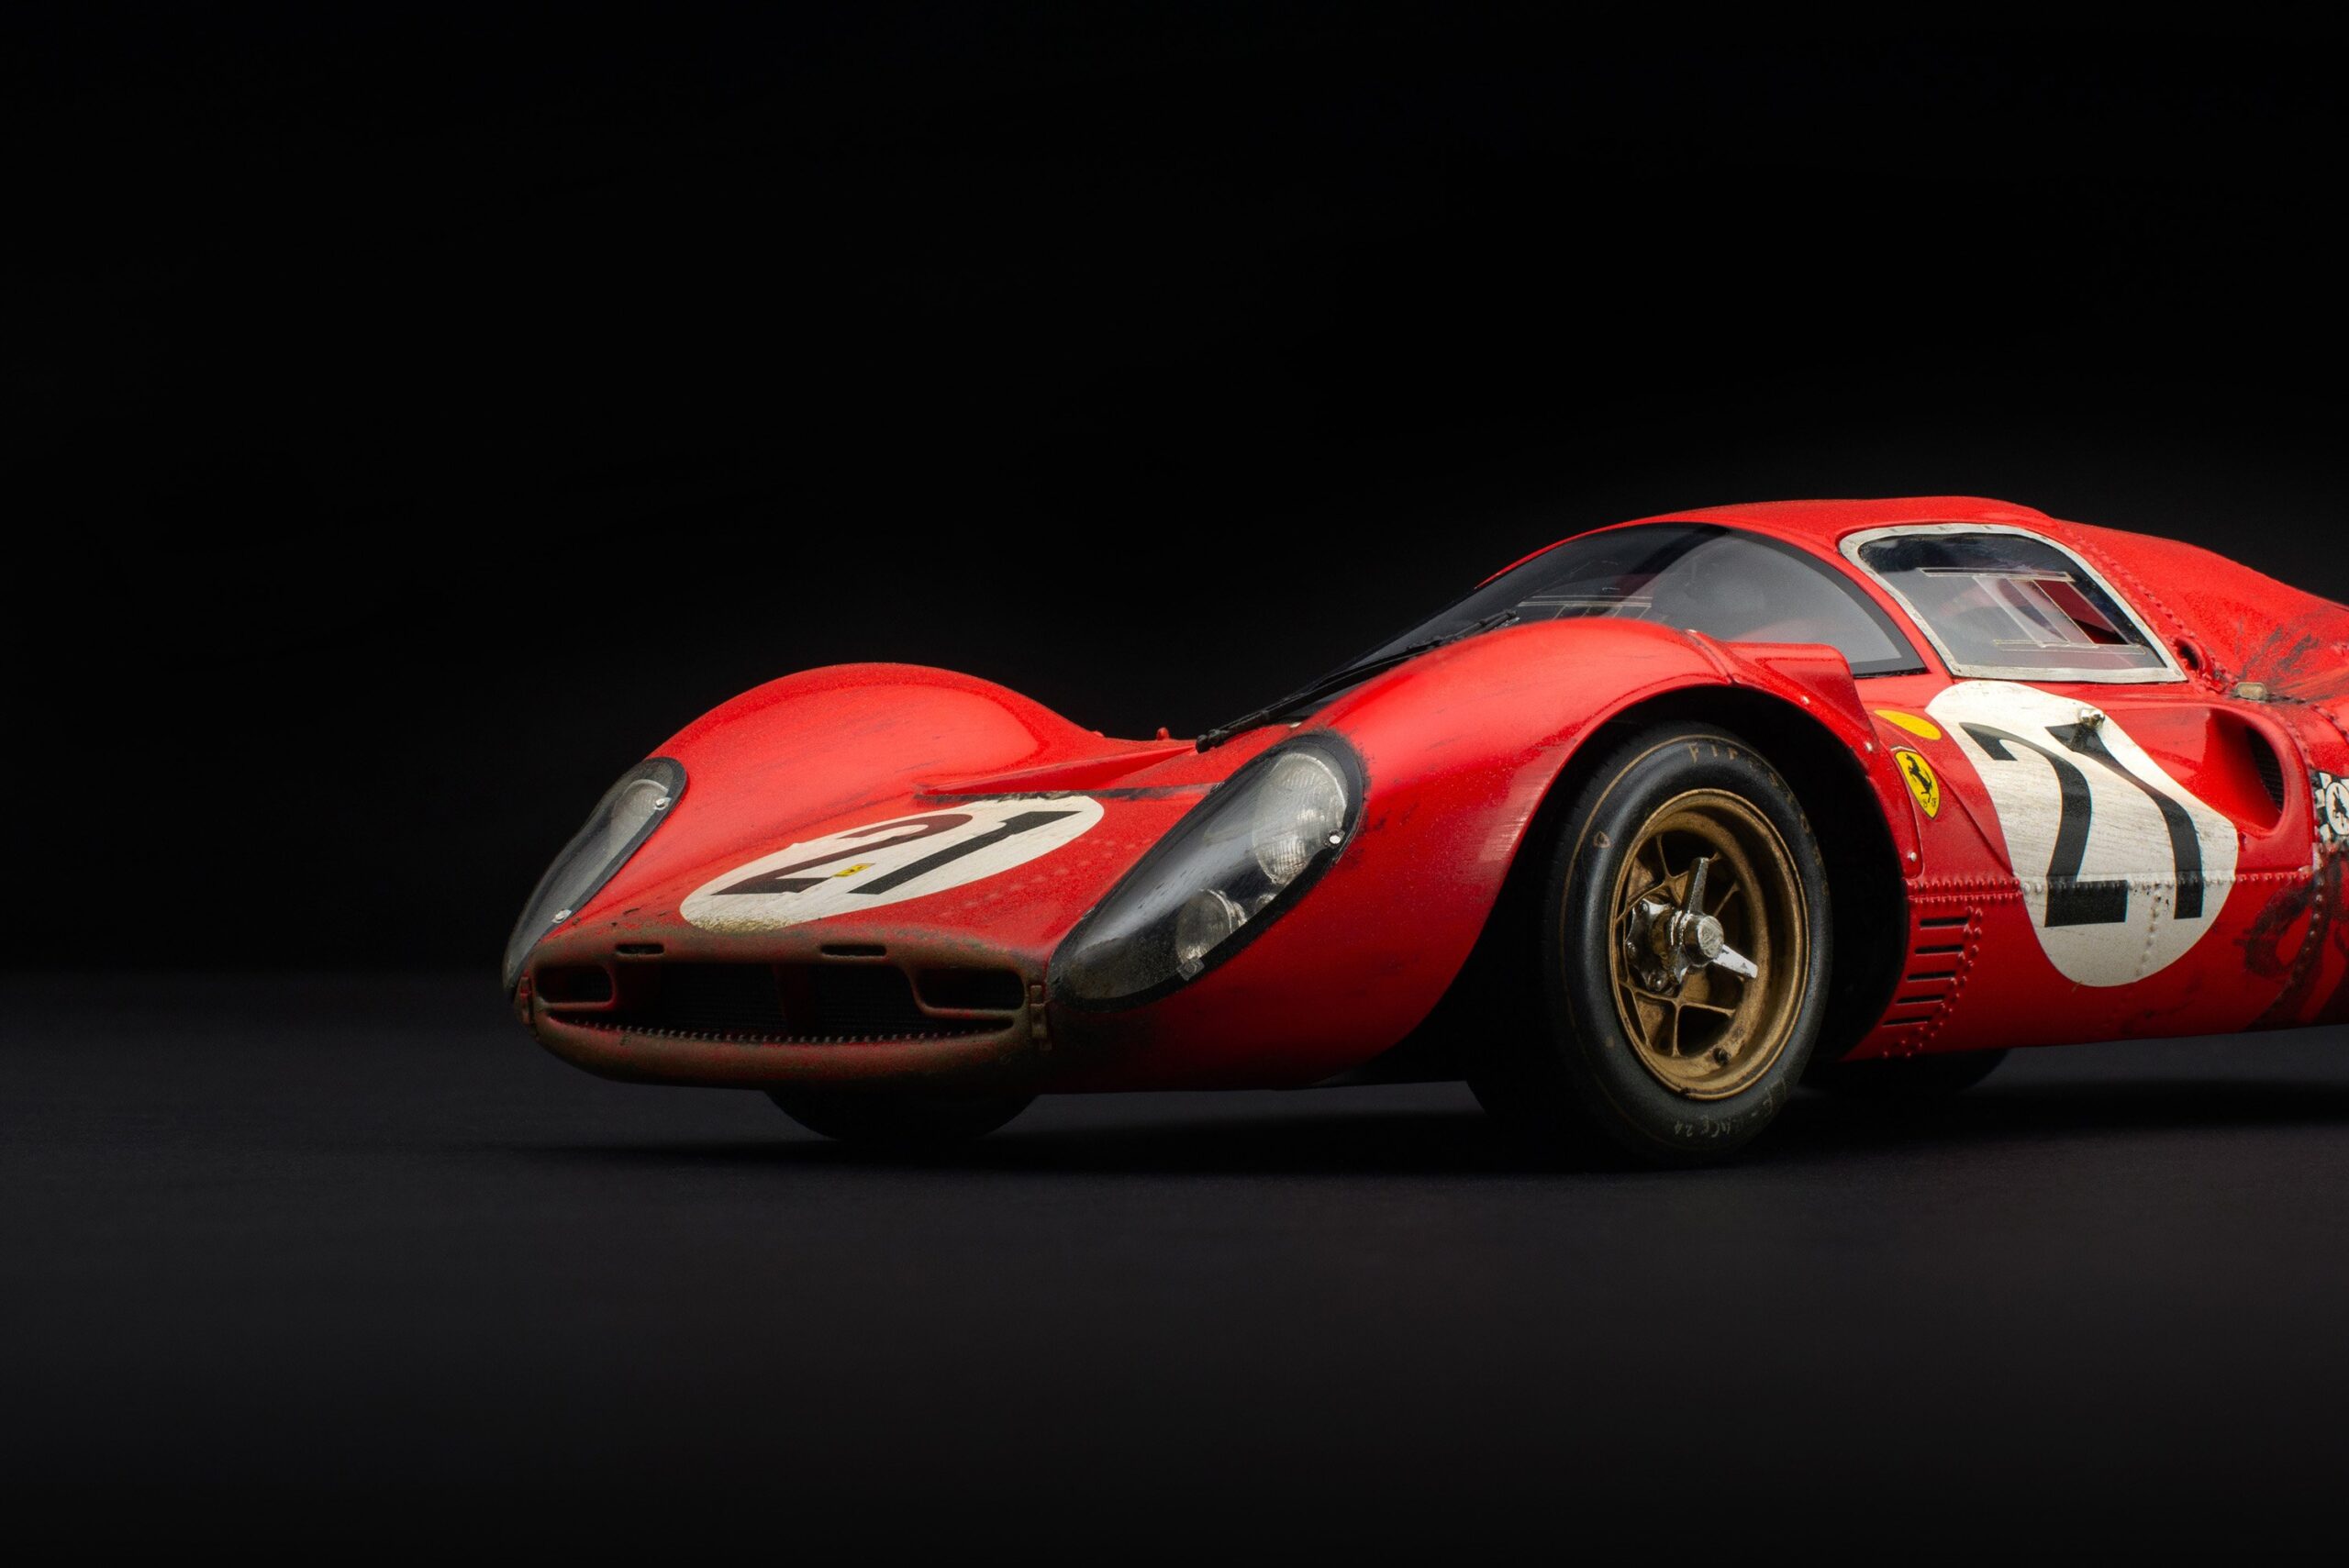 Ferrari330P41.18Scale Weathered FrontEndDetail 4000x2677 crop center scaled